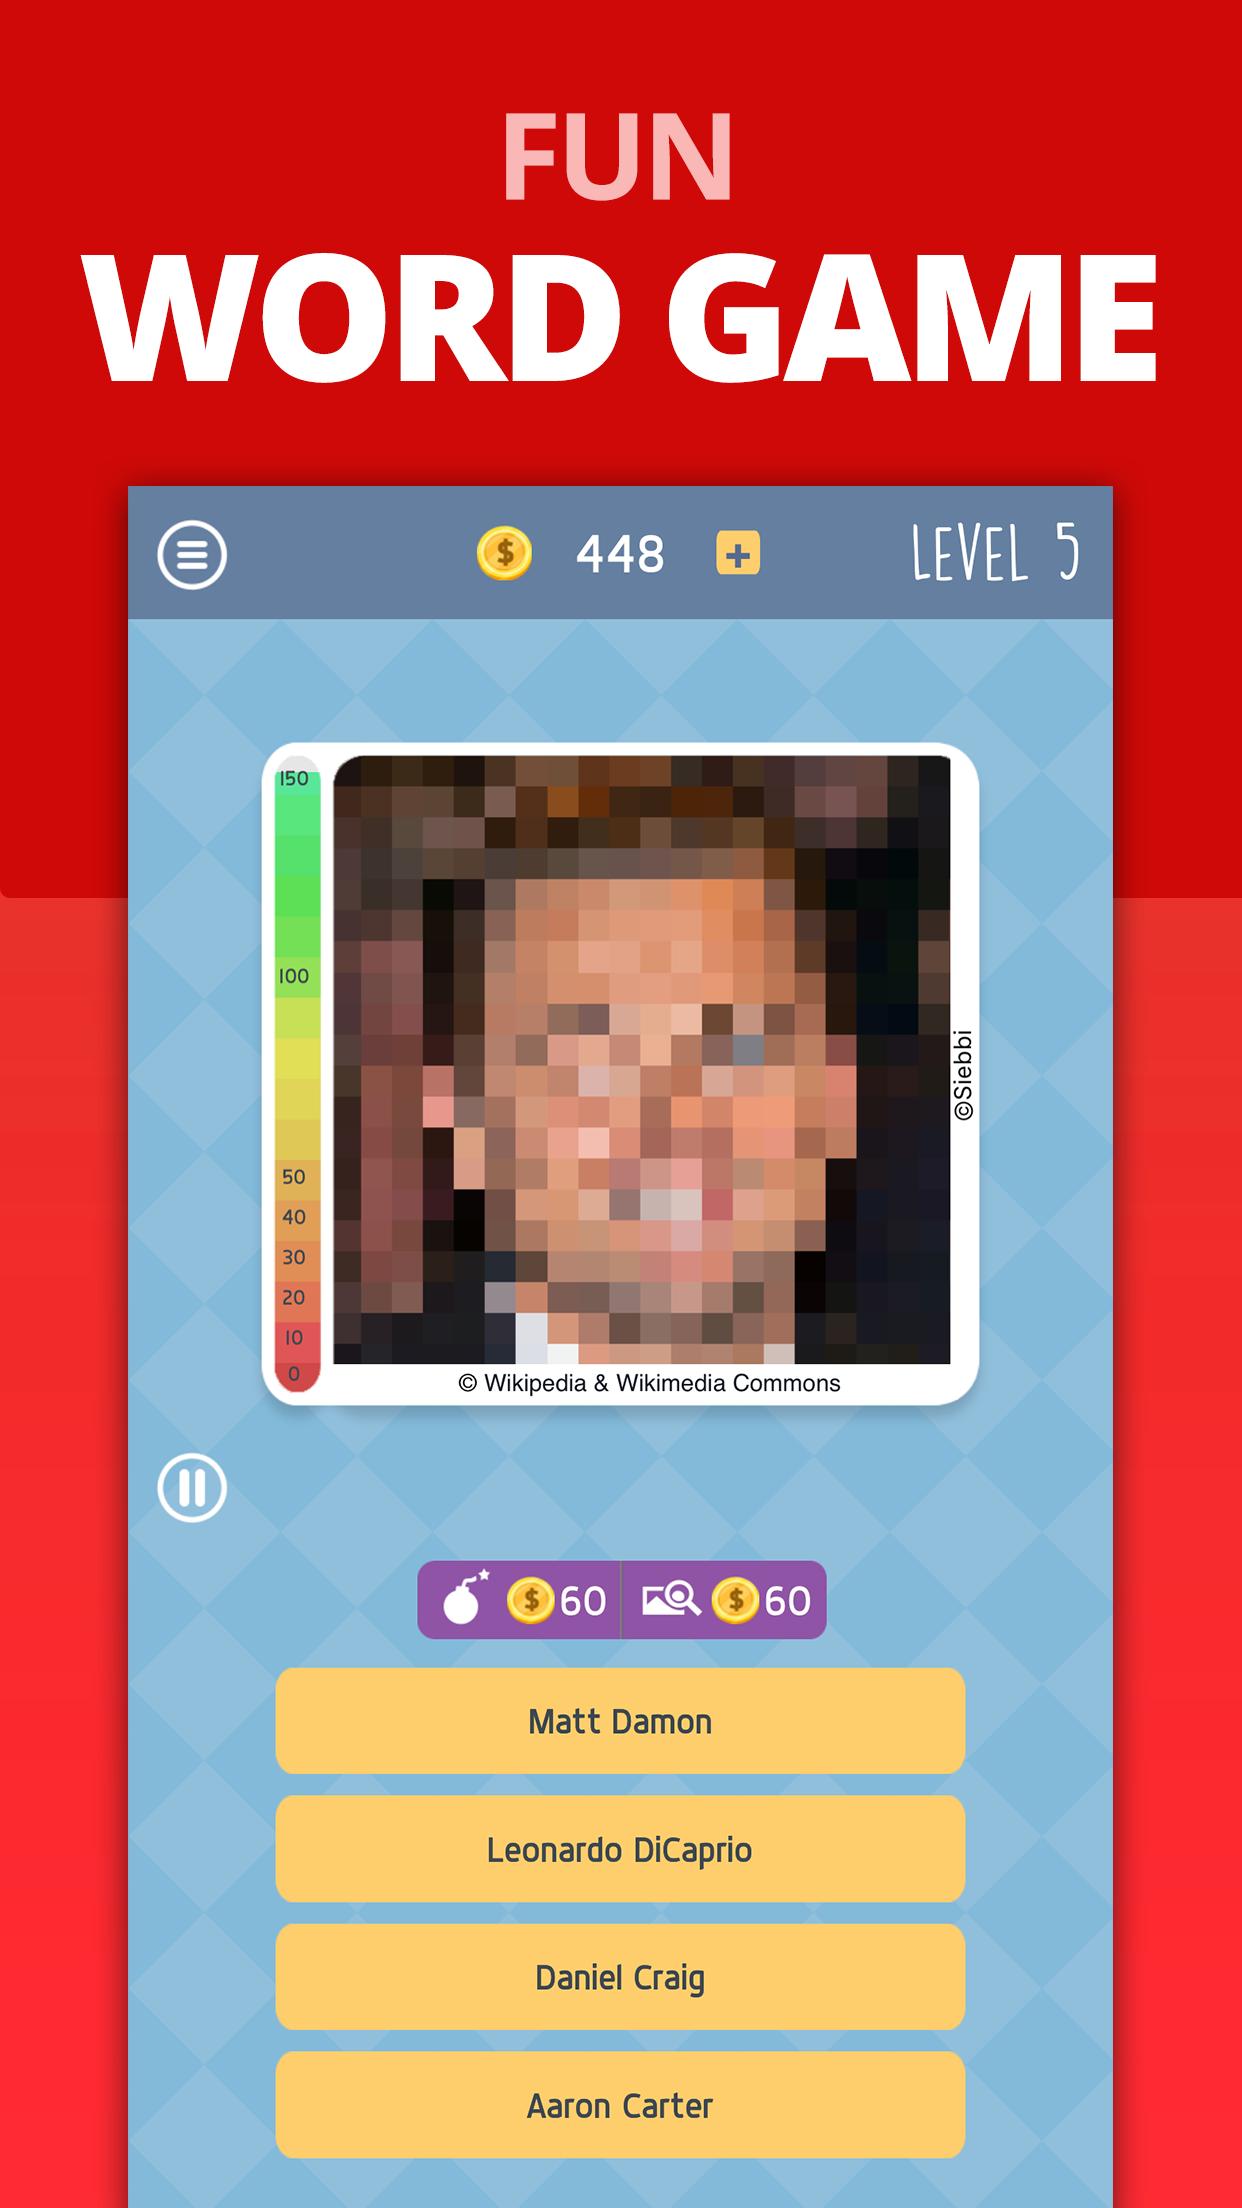 Celebrity Guess for Android - APK Download